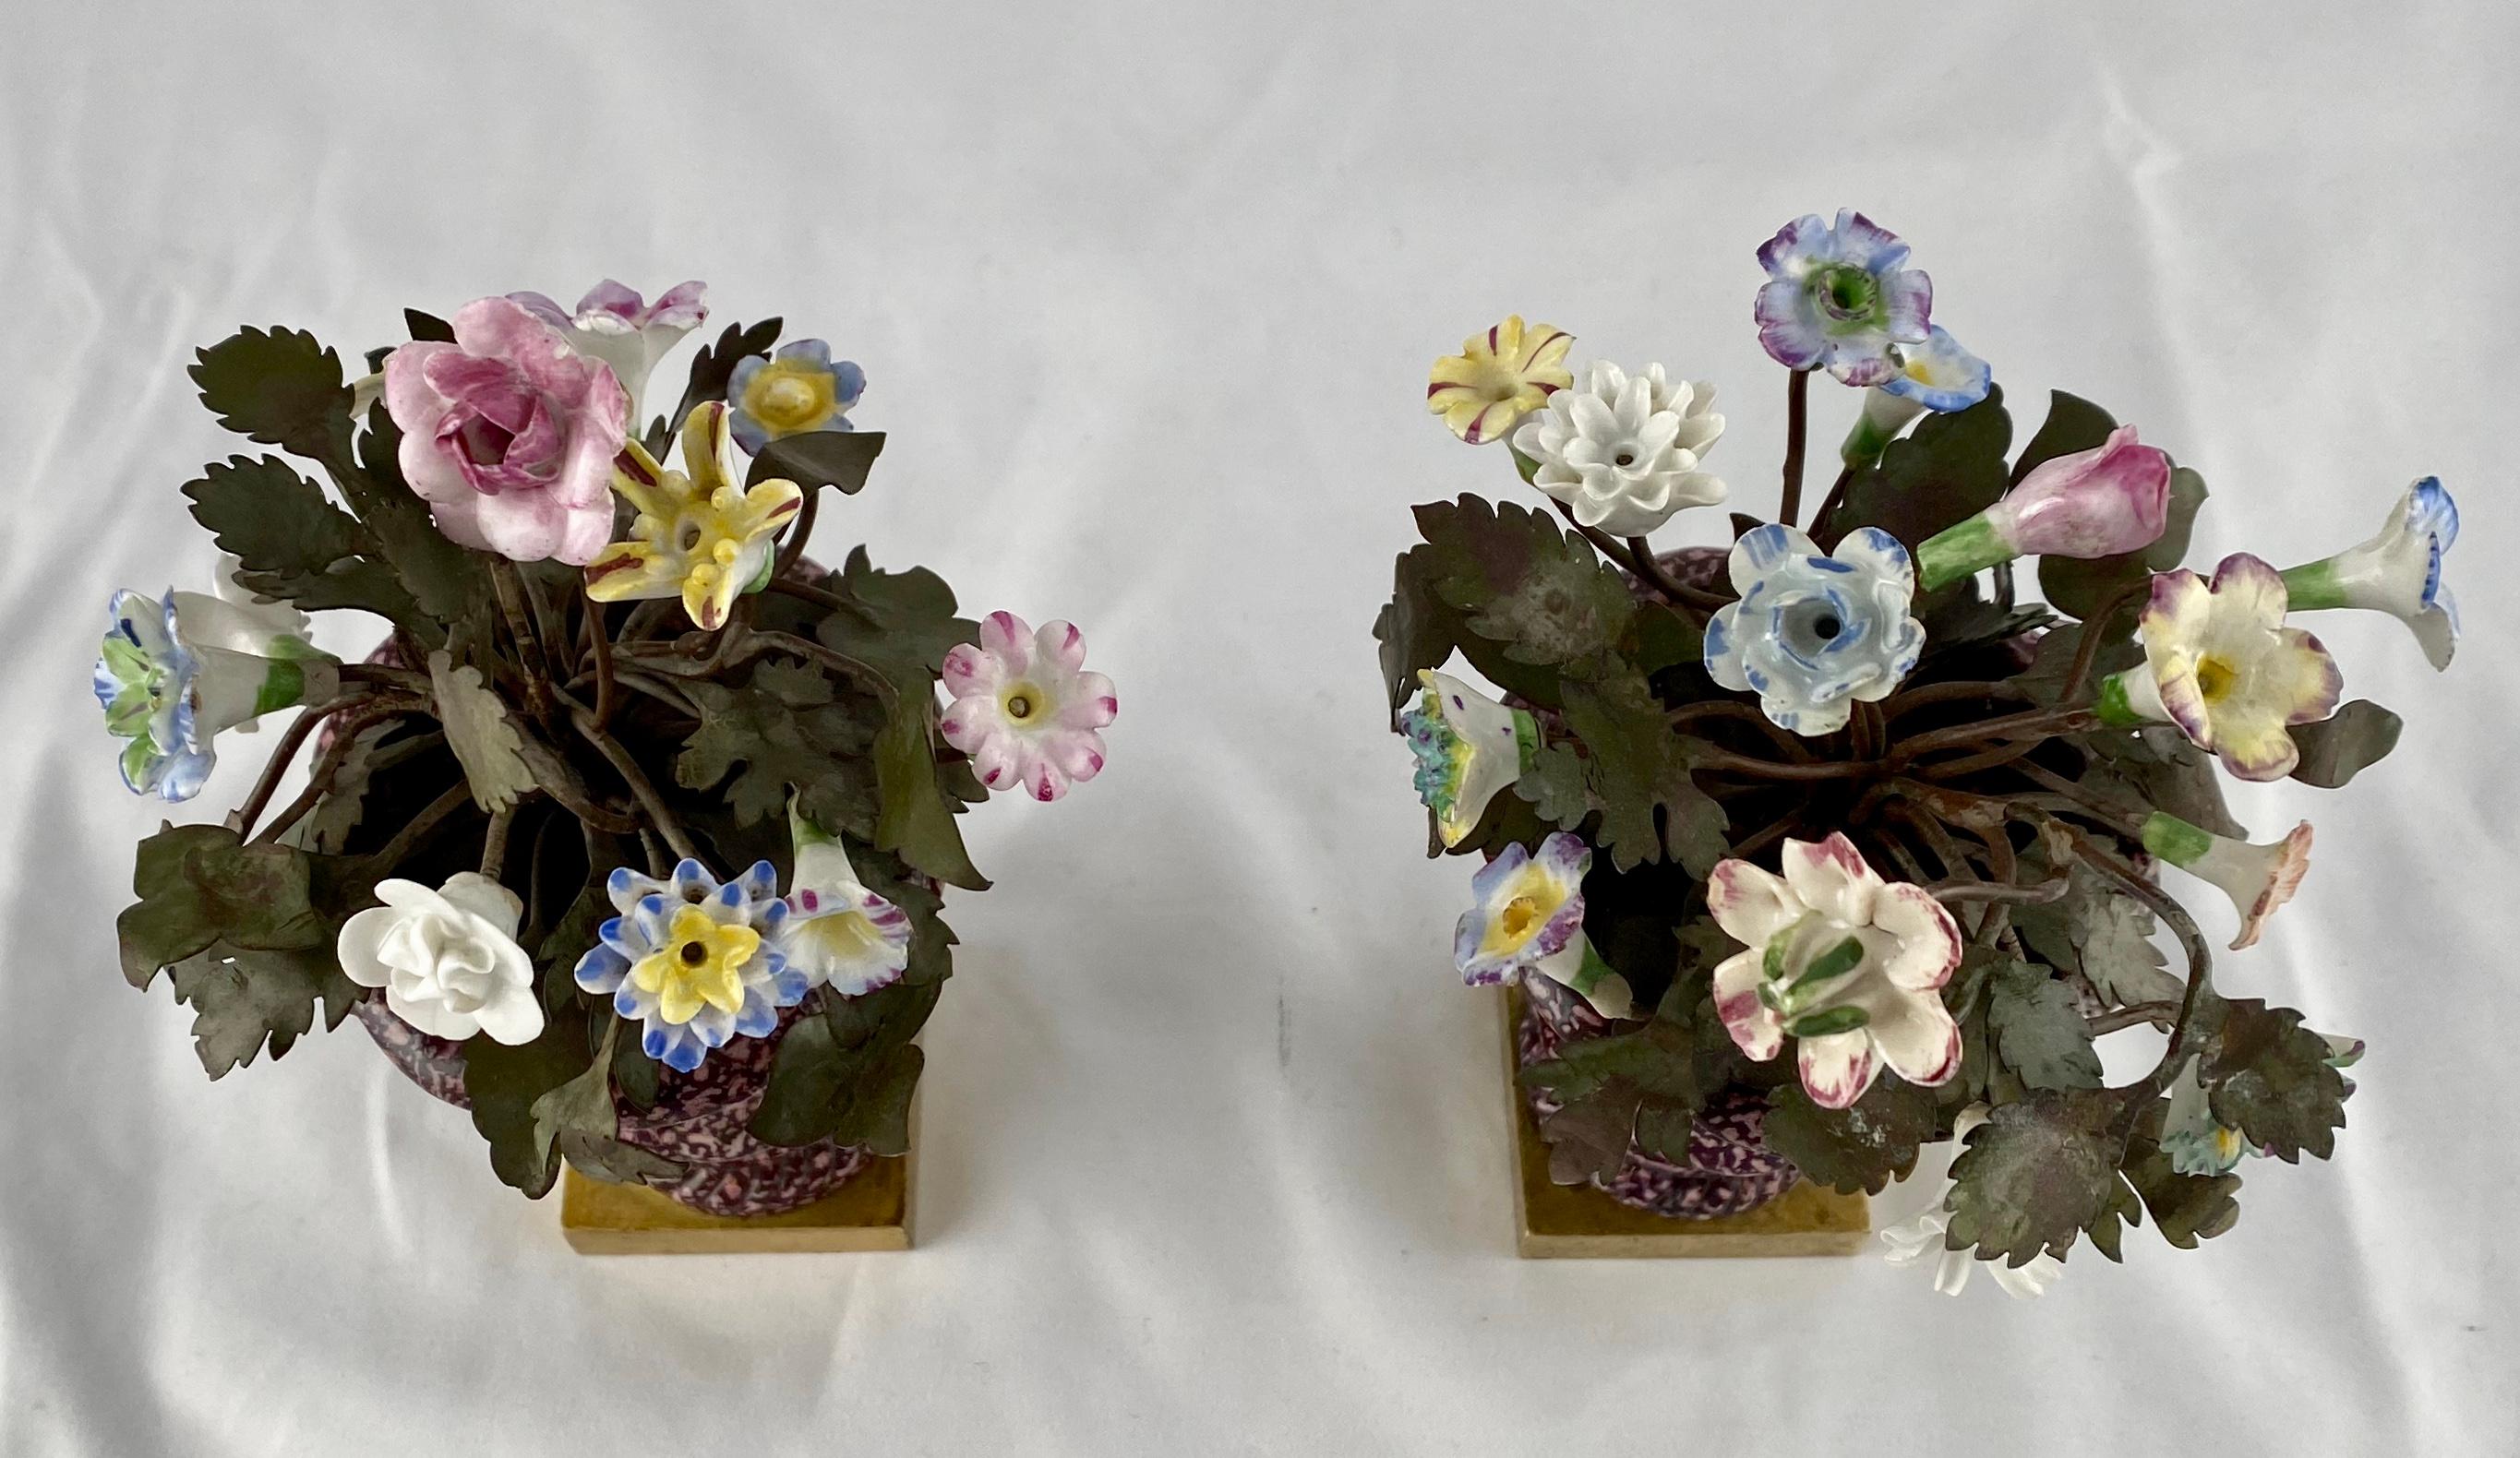 19th Century Pair of Porcelain Vases with Porcelain Flowers and Leafs of Metal, 19th C